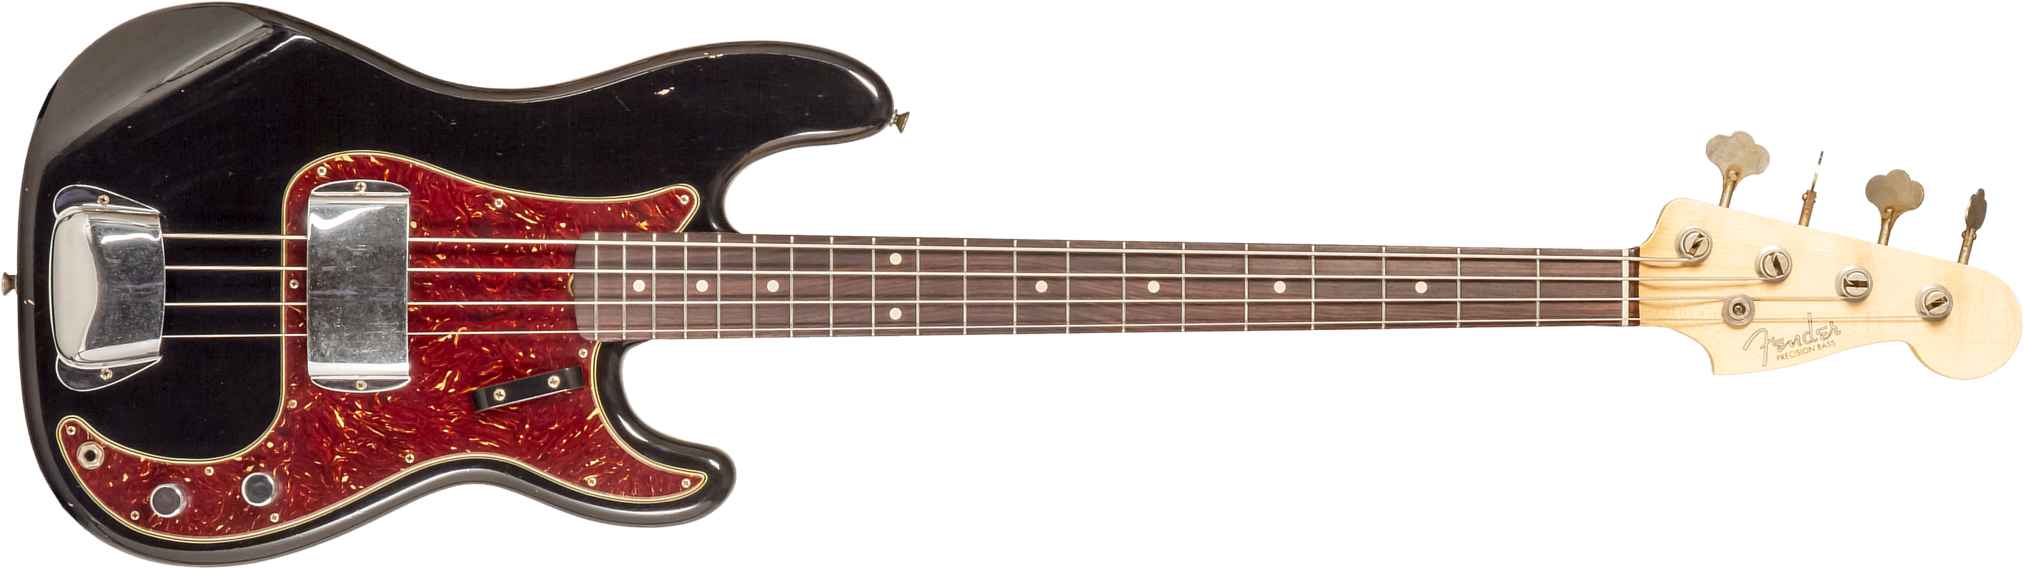 Fender Custom Shop Precision Bass 1962 Rw #r133798 - Journey Man Relic Black - Solid body electric bass - Main picture